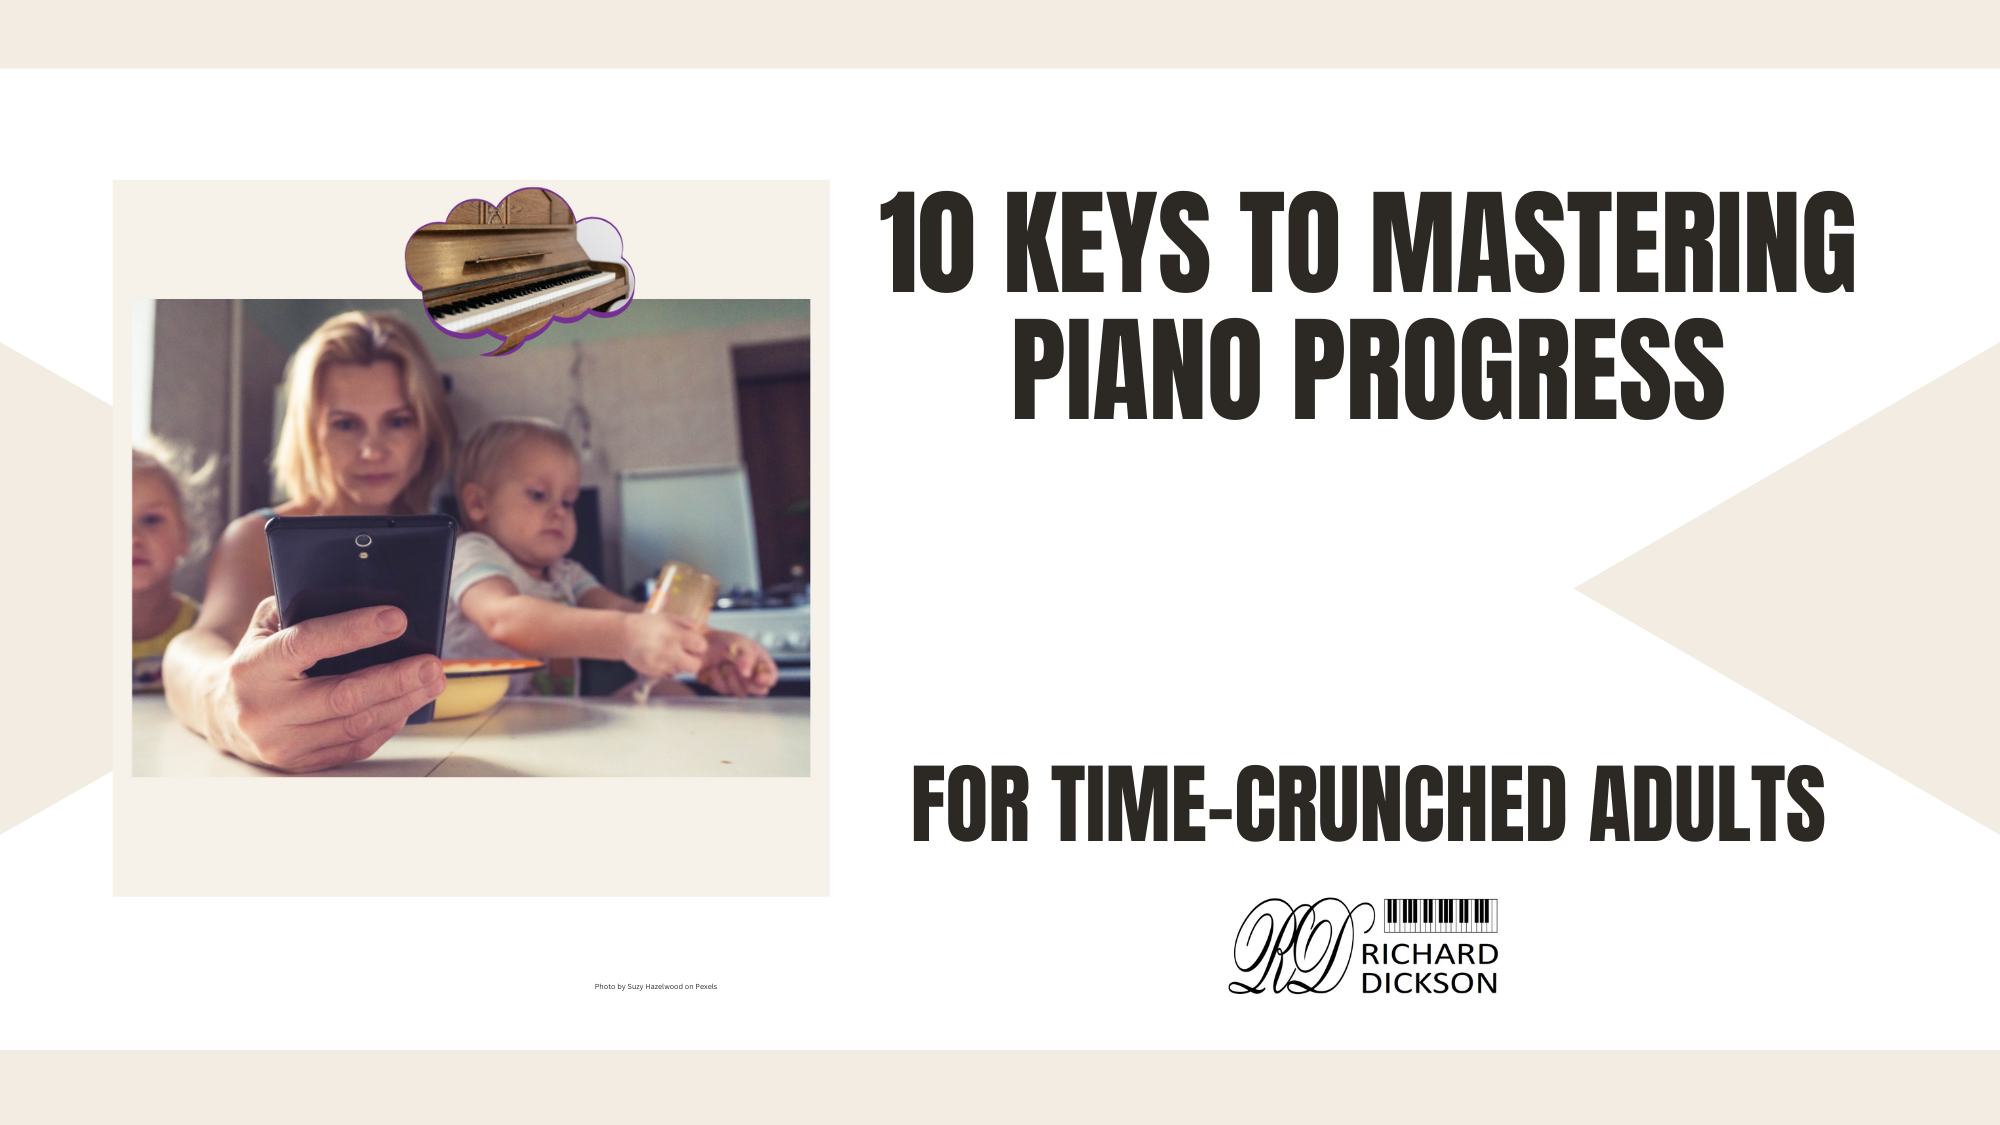 10 Keys to Mastering Piano Progress for Time-Crunched Adults